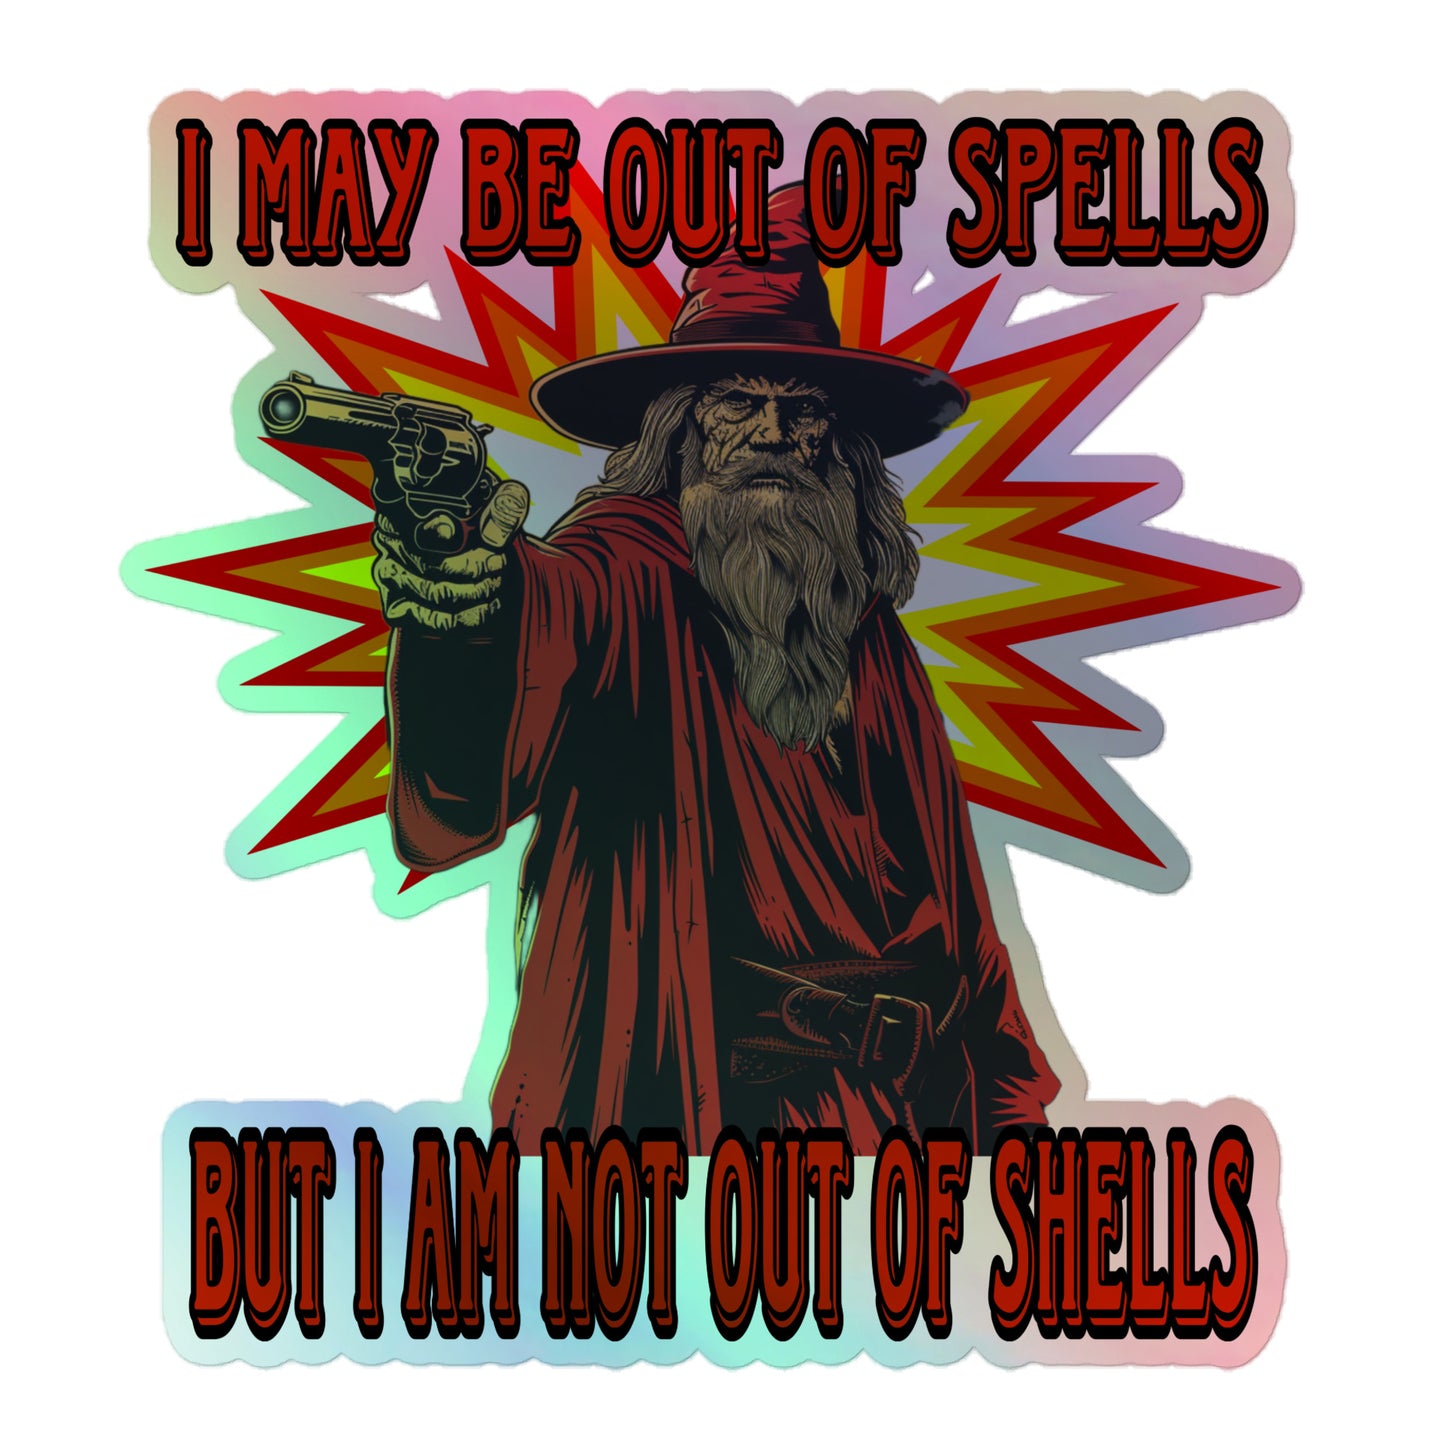 I may be out of spells but I am not out of shells Holographic sticker